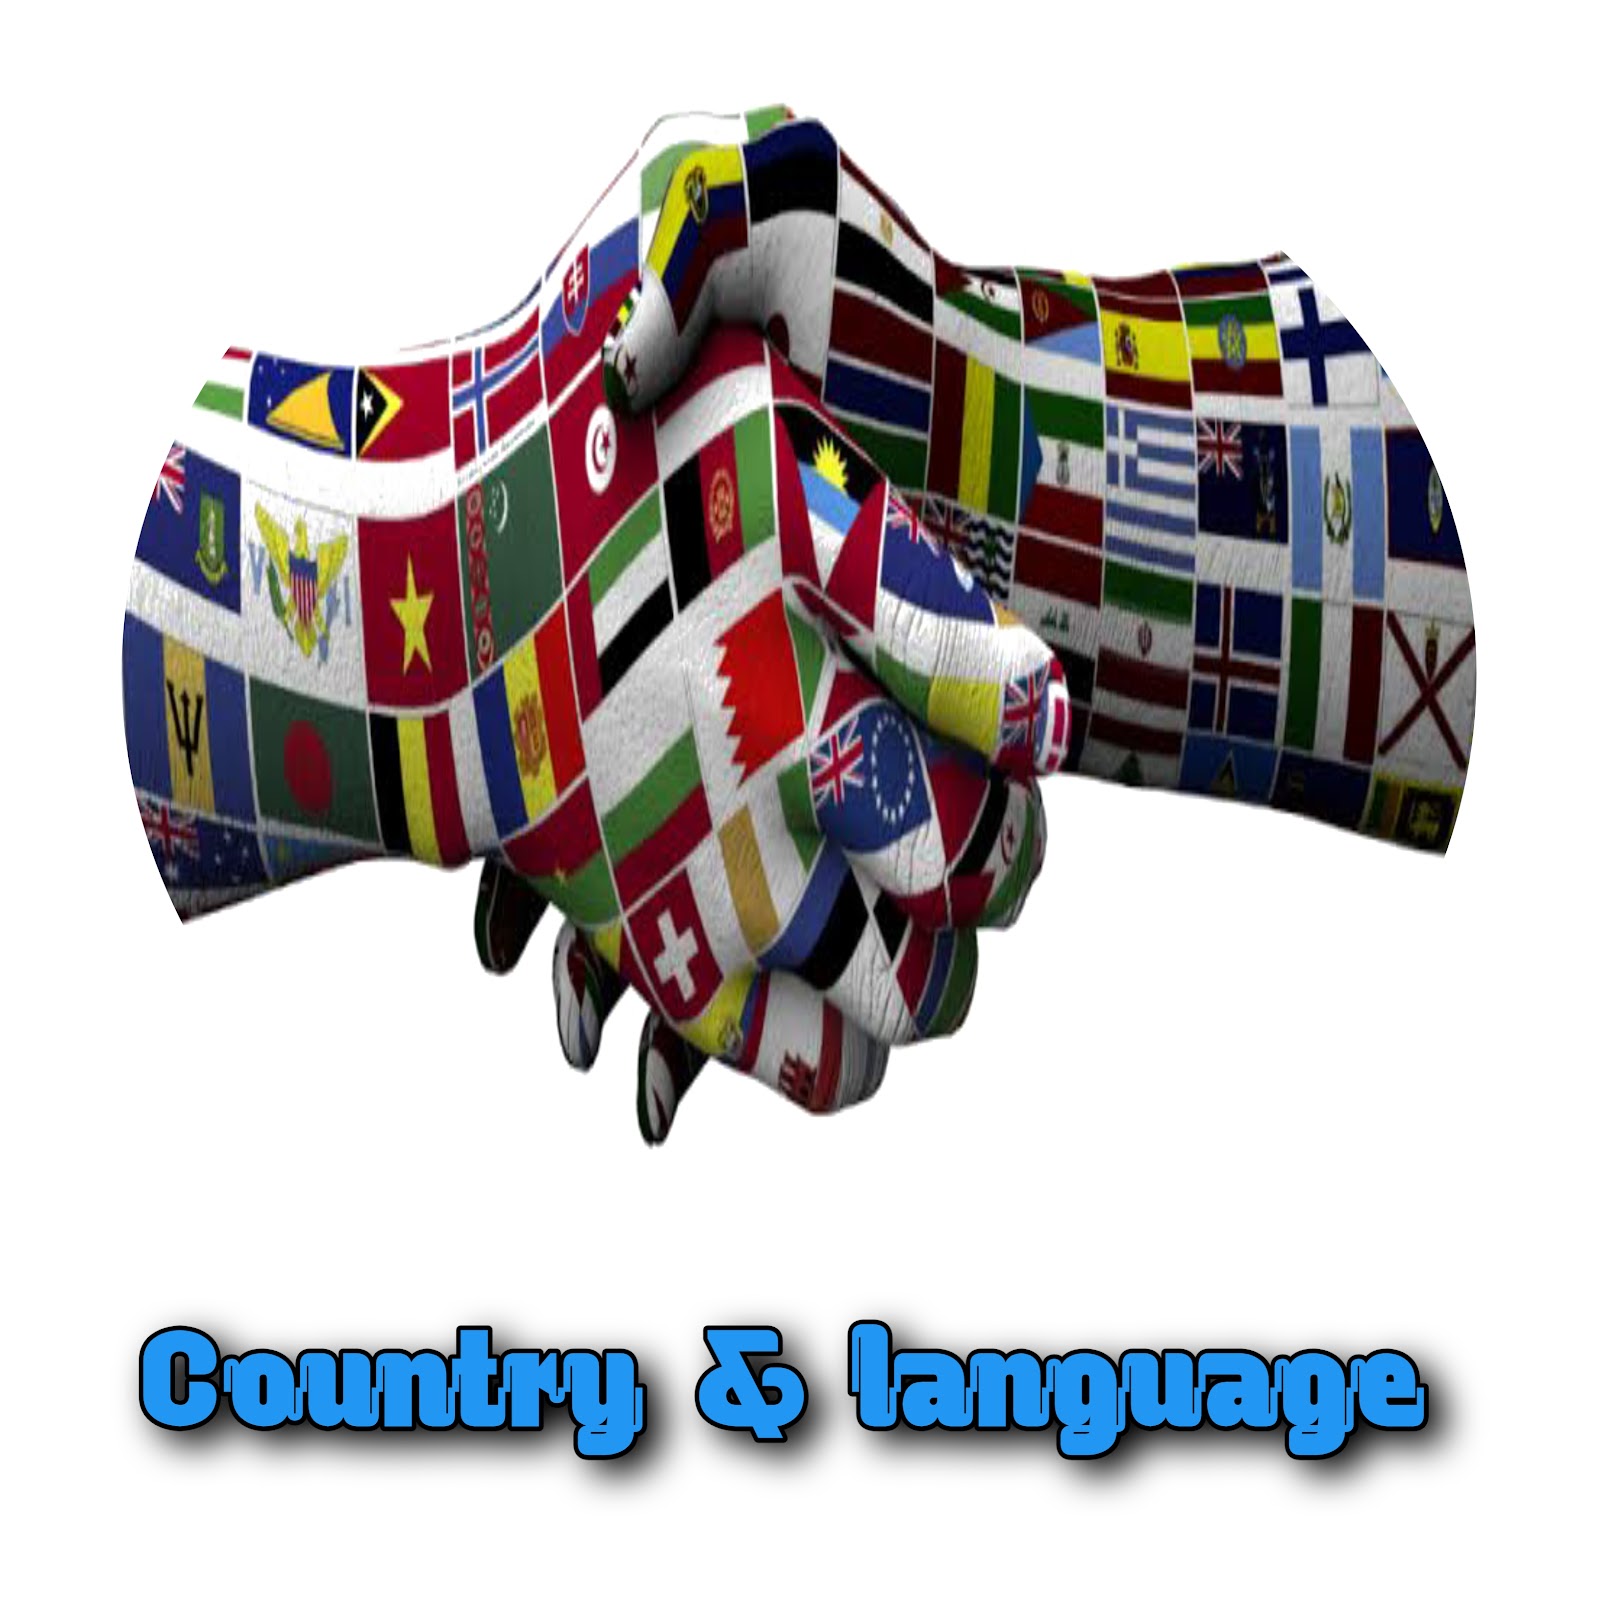 Language and Country